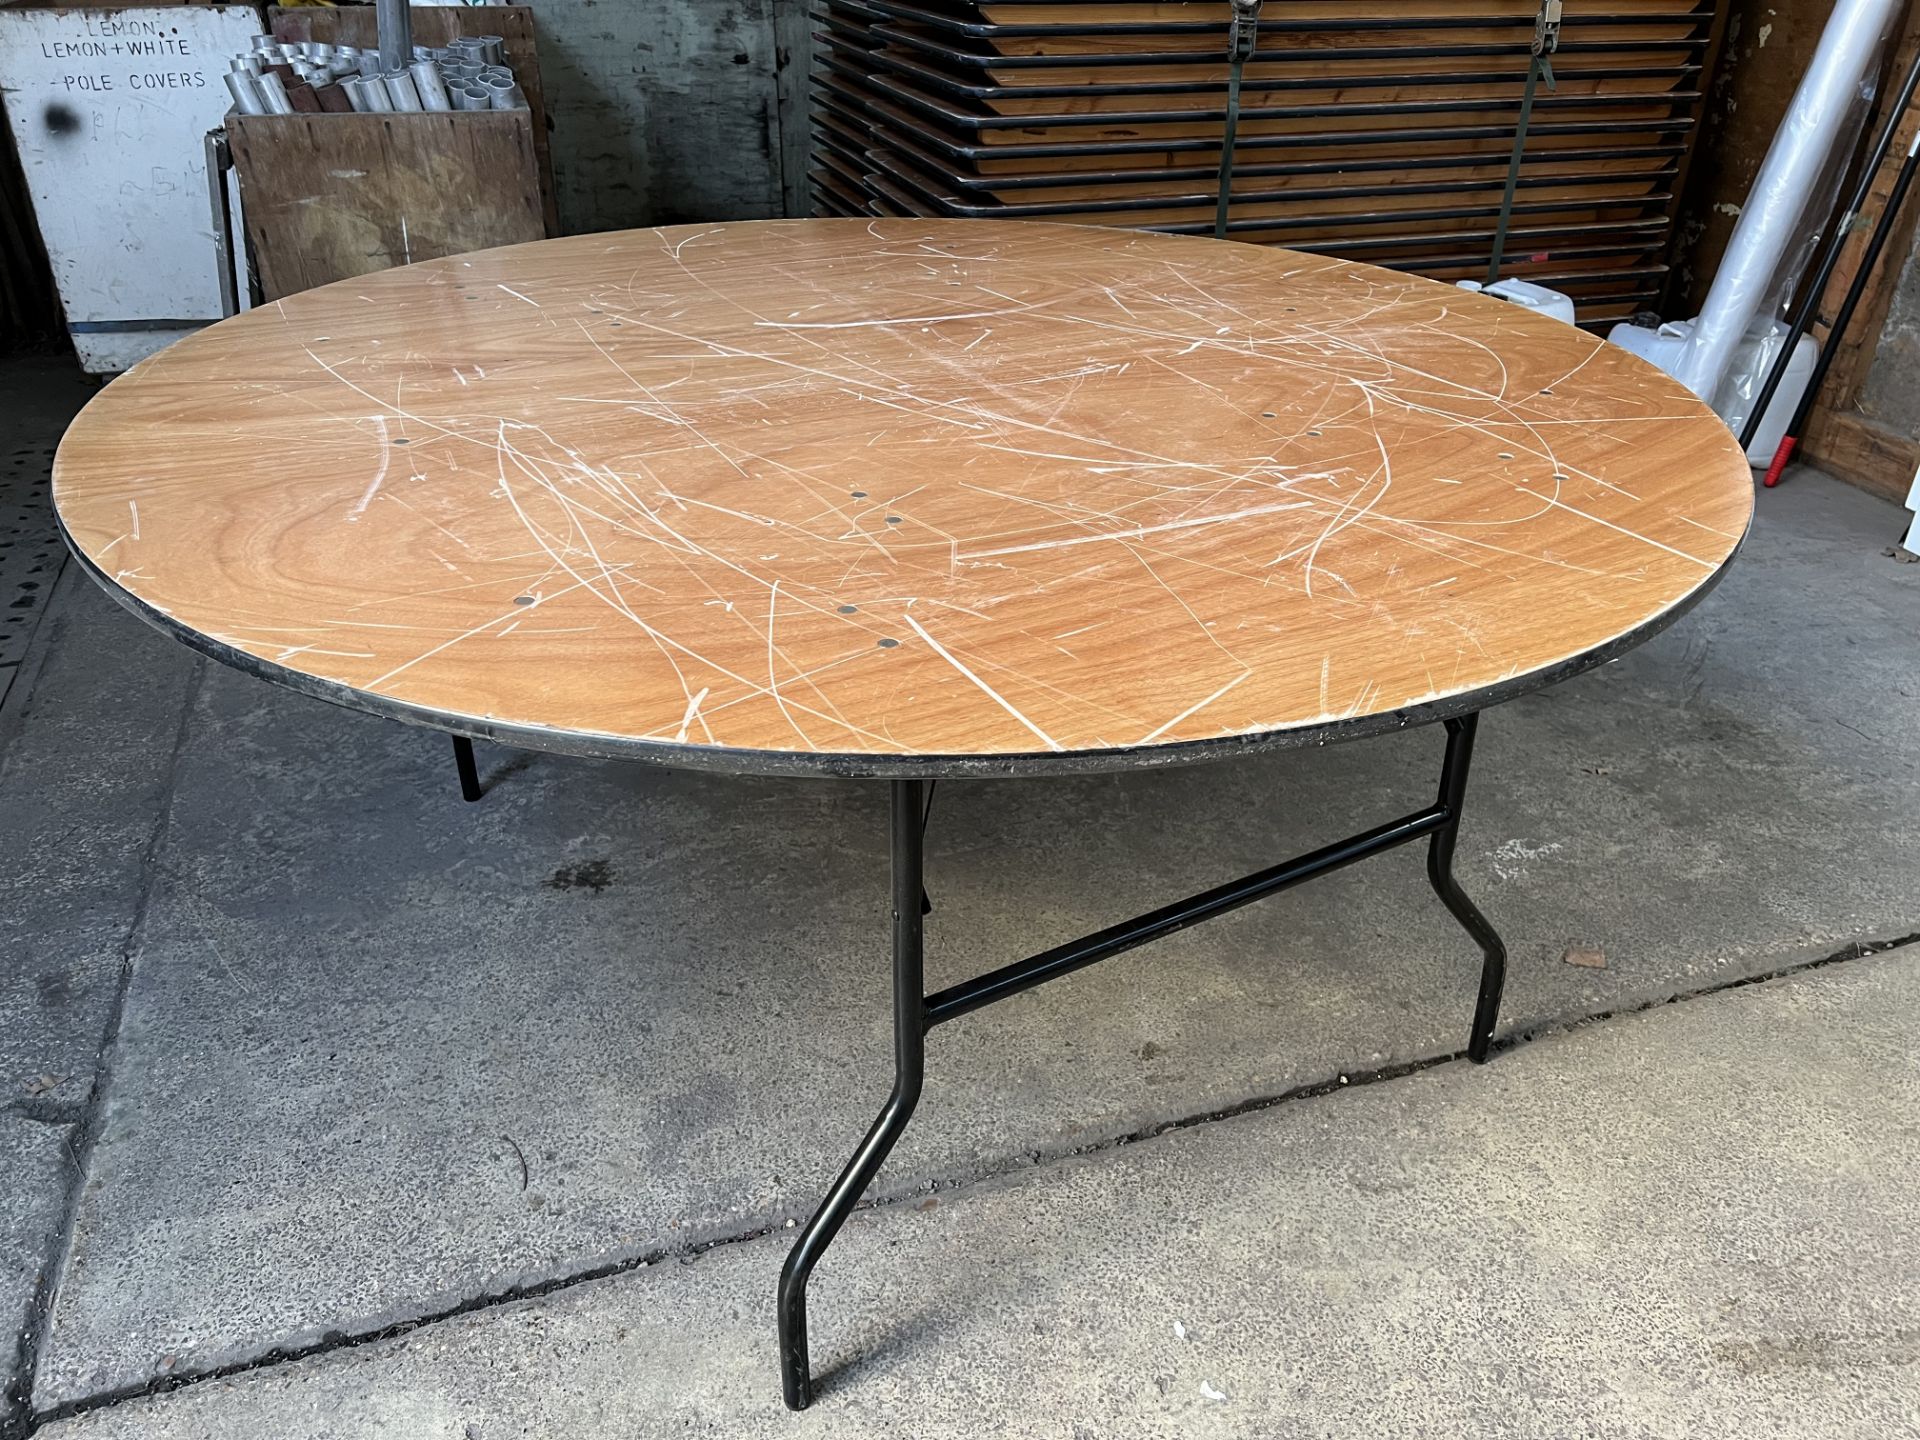 10 no 5ft 6in diameter round tables with folding legs and plywood top. This lot is subject to VAT.